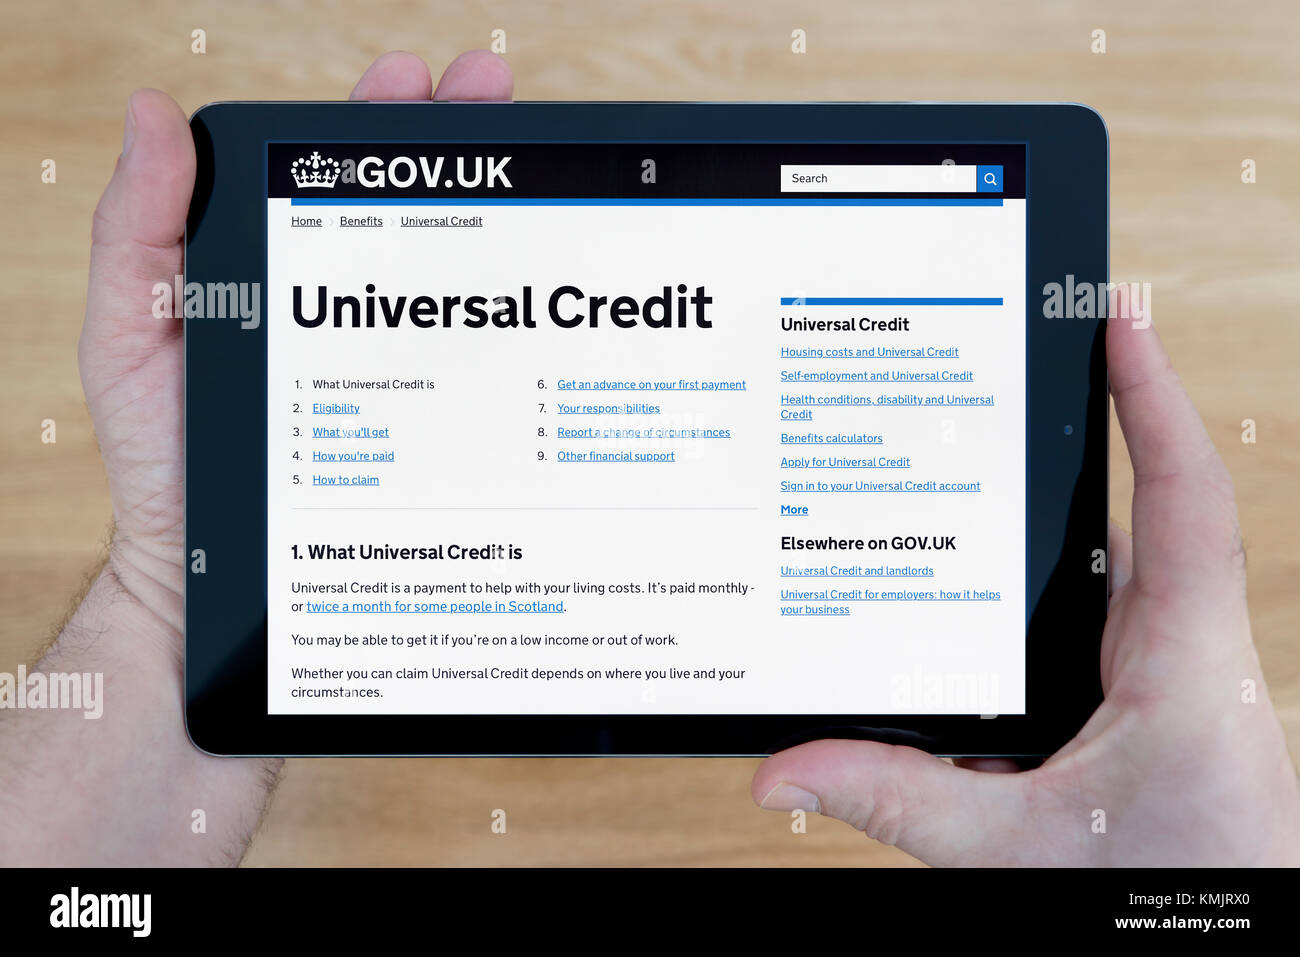 A man looks at the Universal Credit section of the Gov.uk website on an iPad tablet device, shot against a wooden table top background -Editorial only Stock Photo